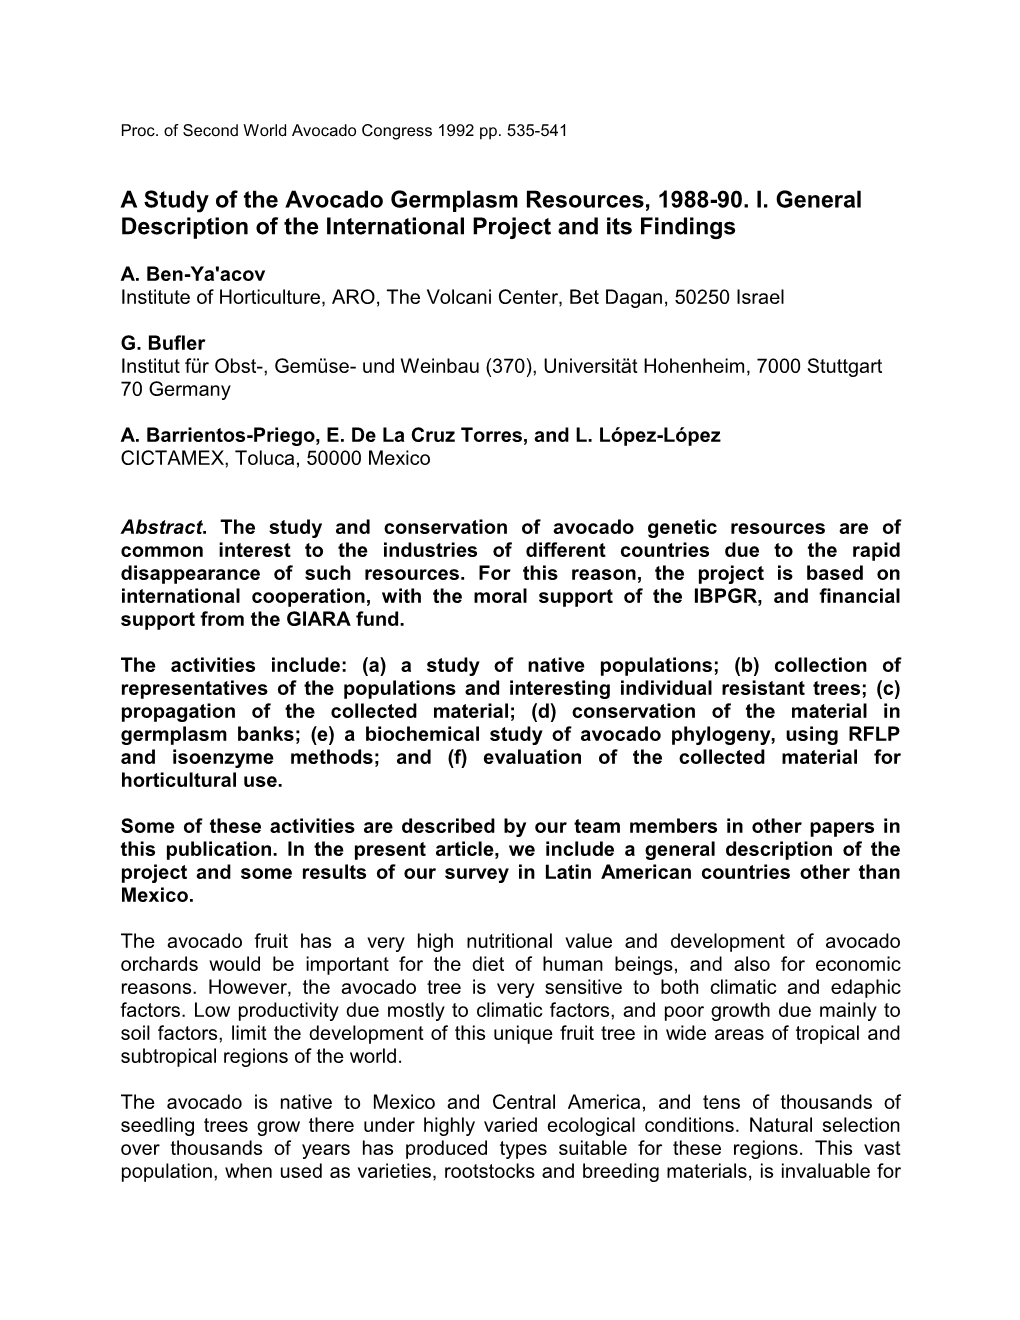 A Study of the Avocado Germplasm Resources, 1988-90. I. General Description of the International Project and Its Findings